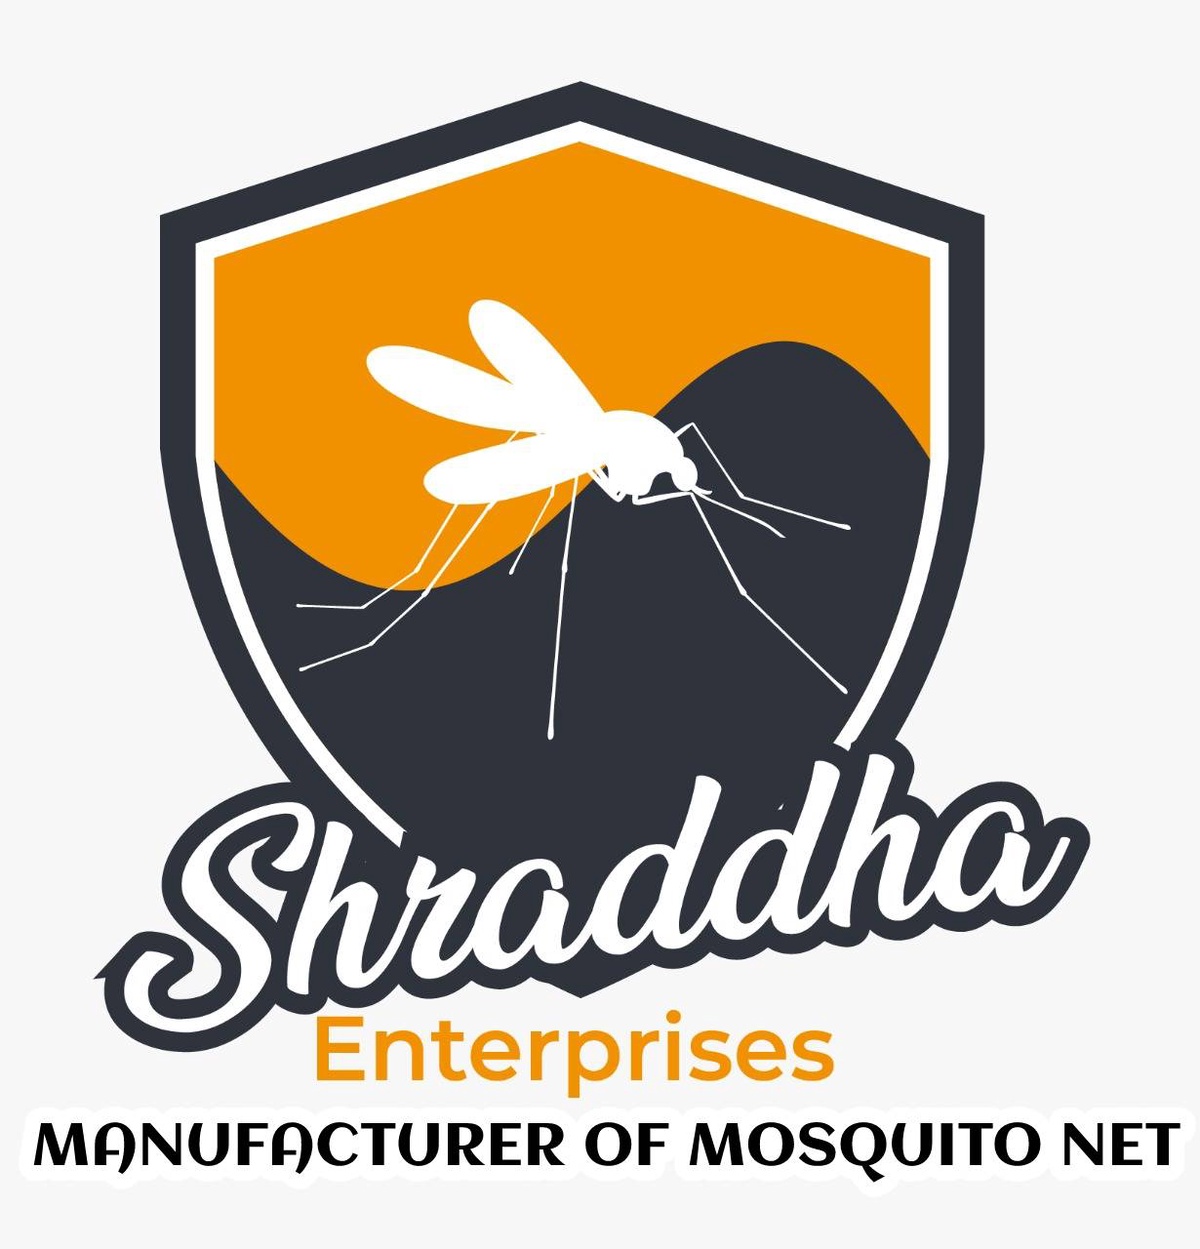 Protect Your Surroundings From Mosquitoes Through Mosquito Nets!